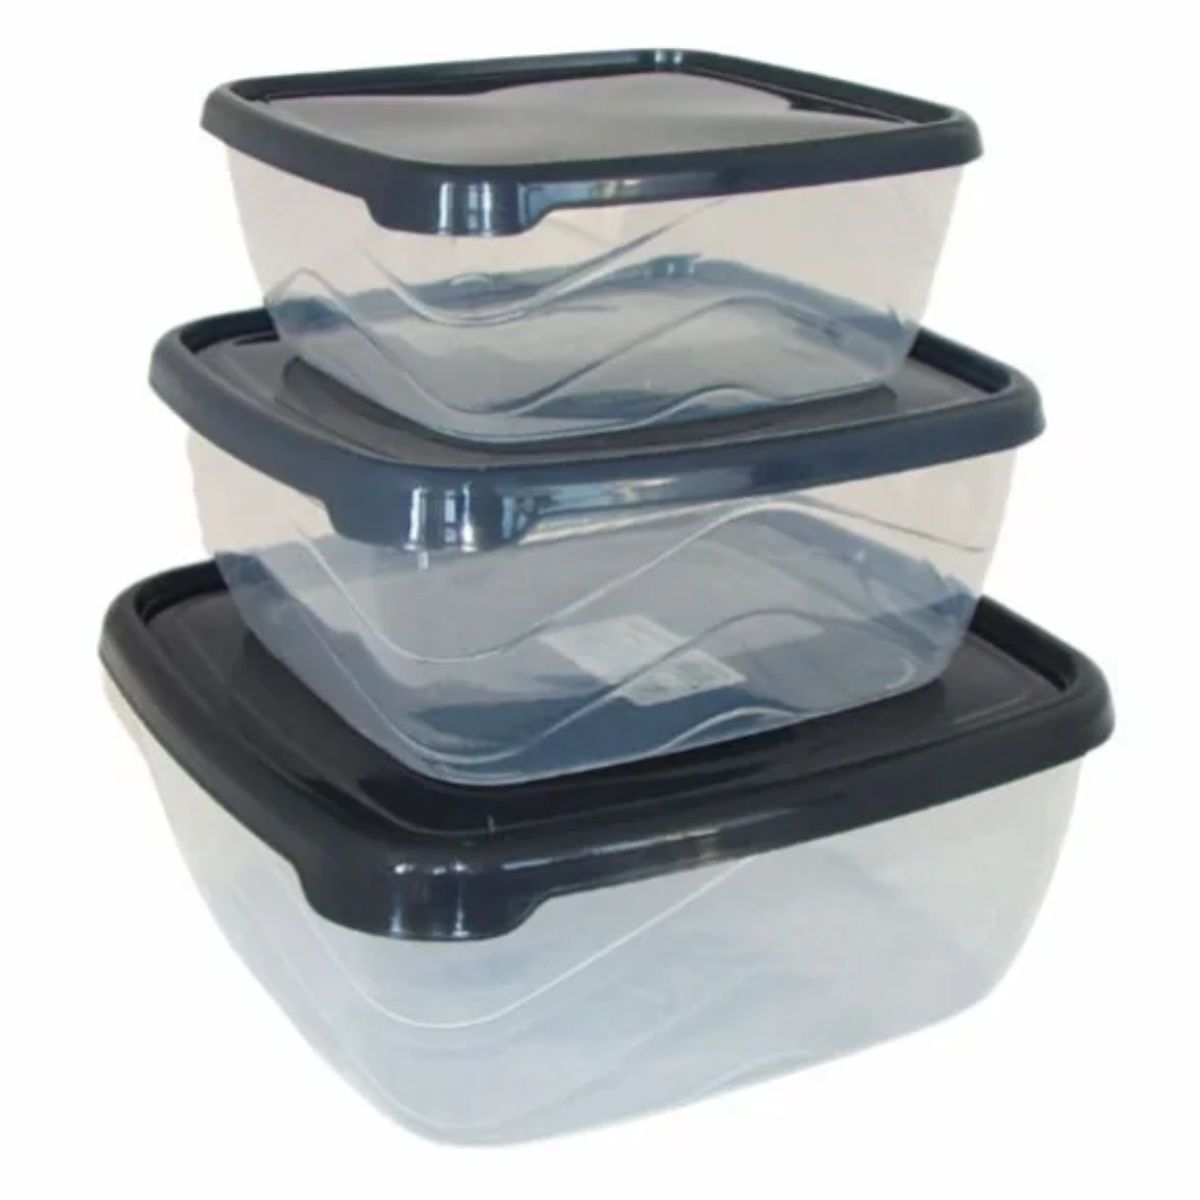 A set of three Beehome - Square Food Container - 3pcs with lids.